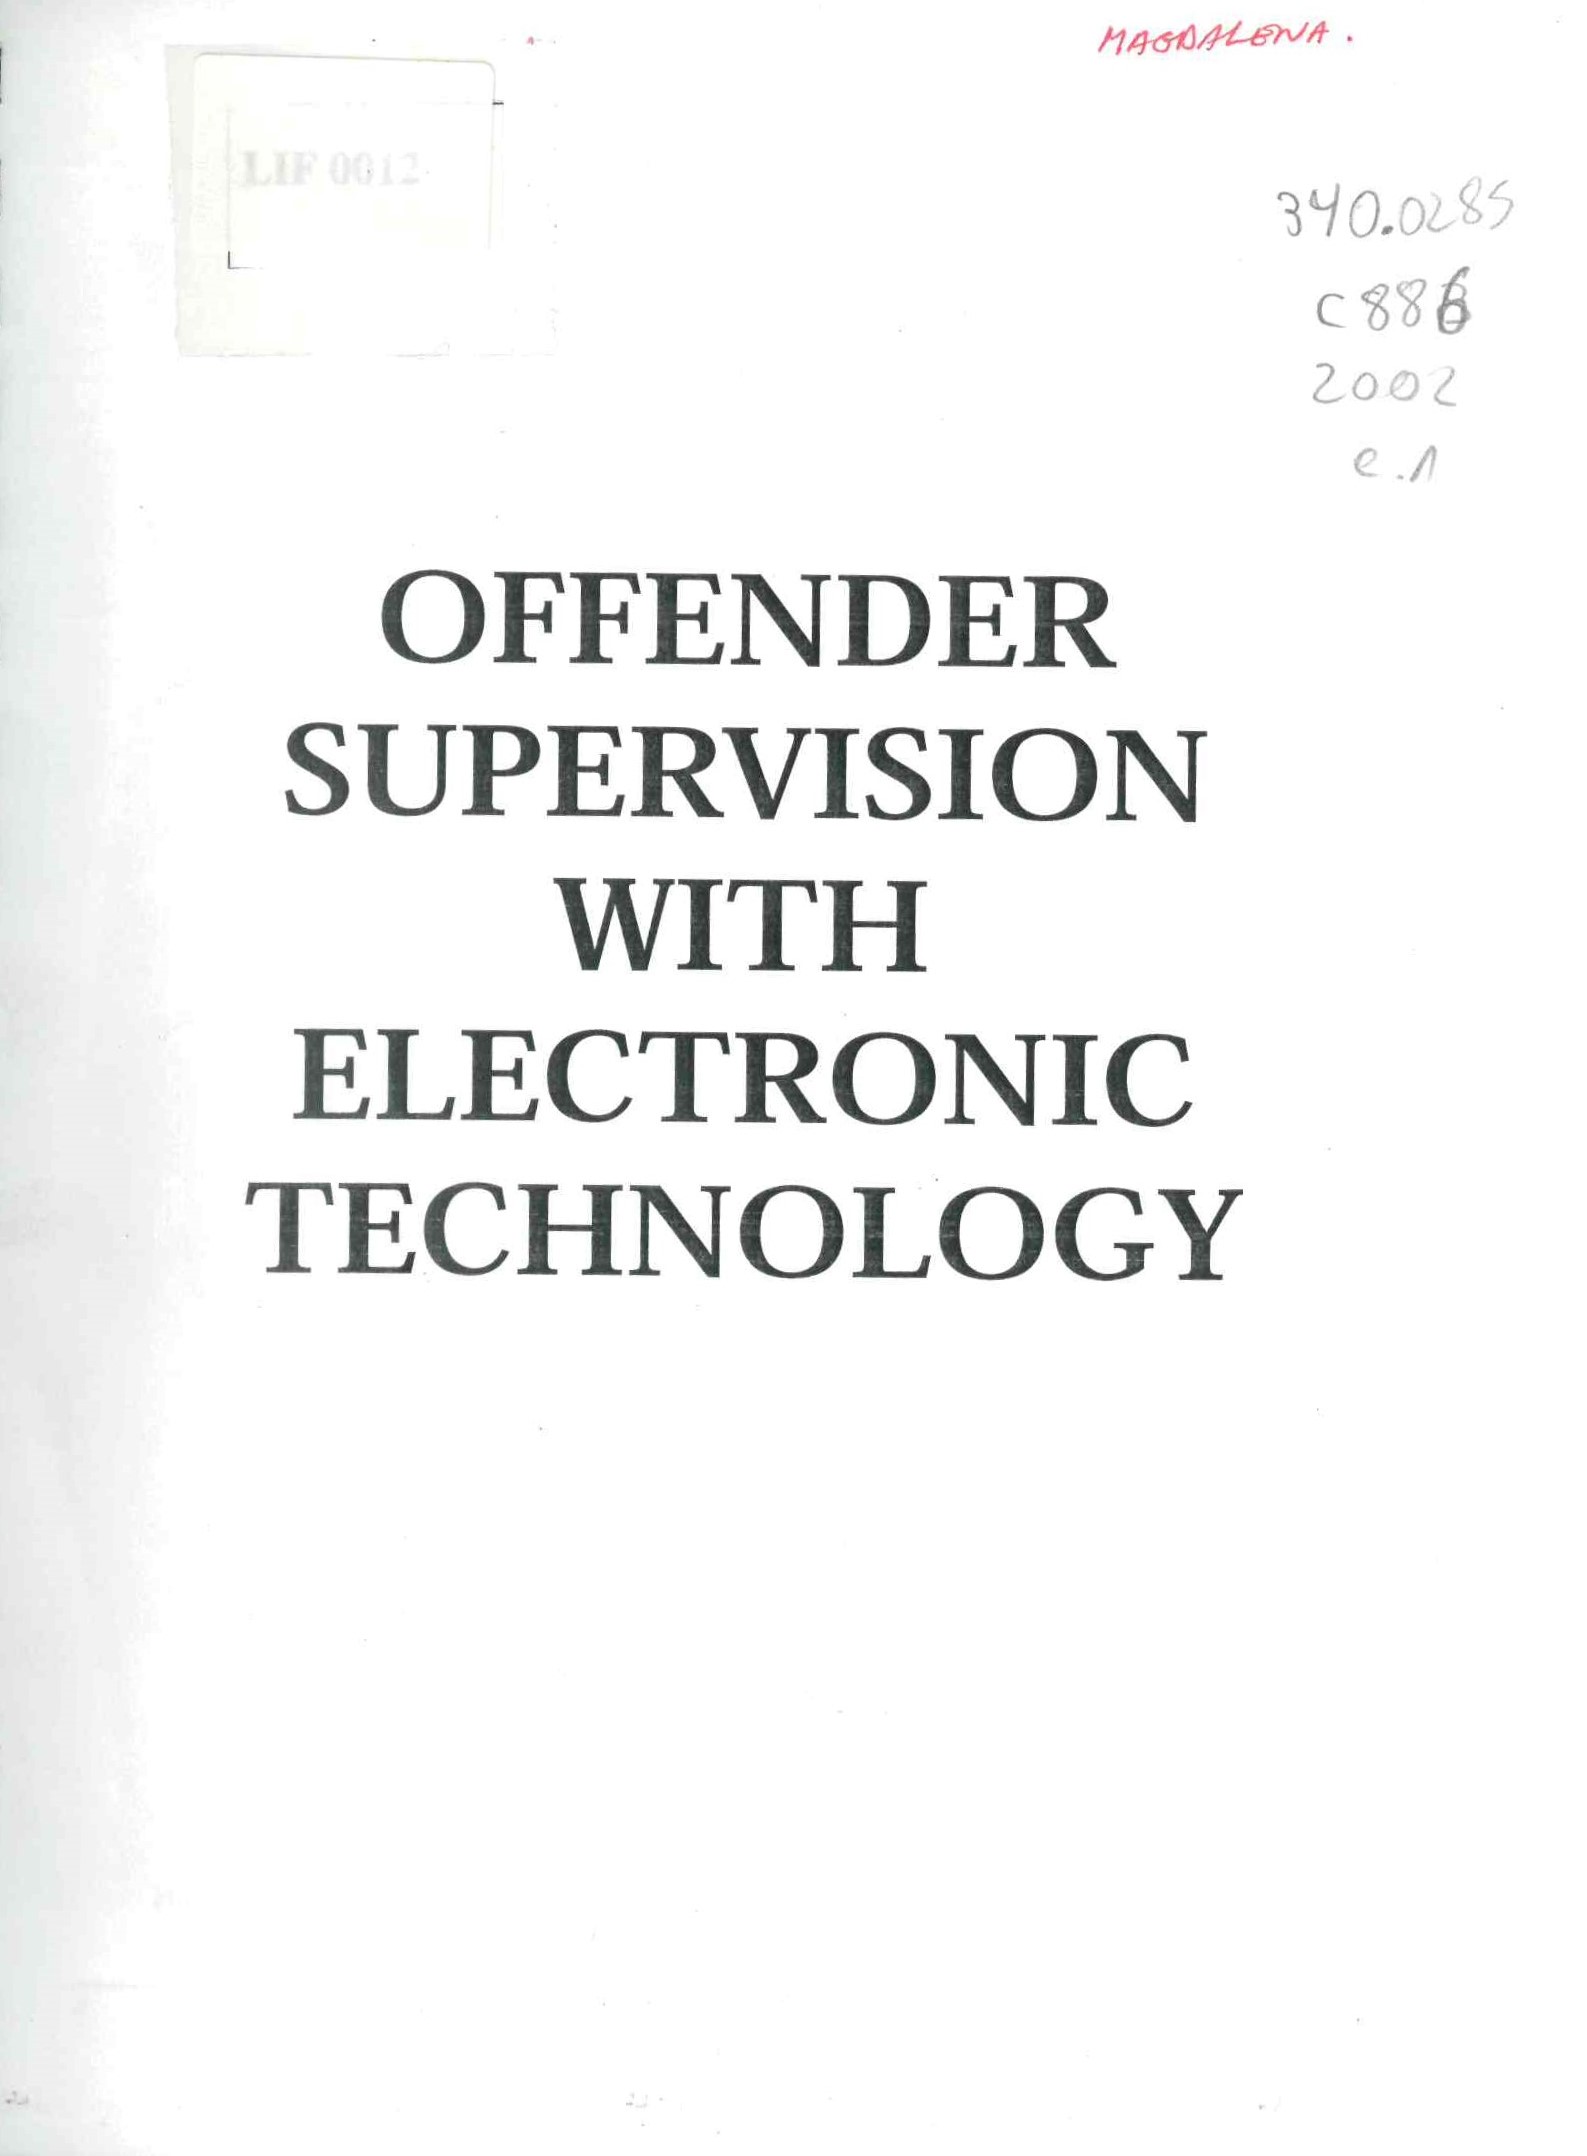 Offender supervision with electronic technology